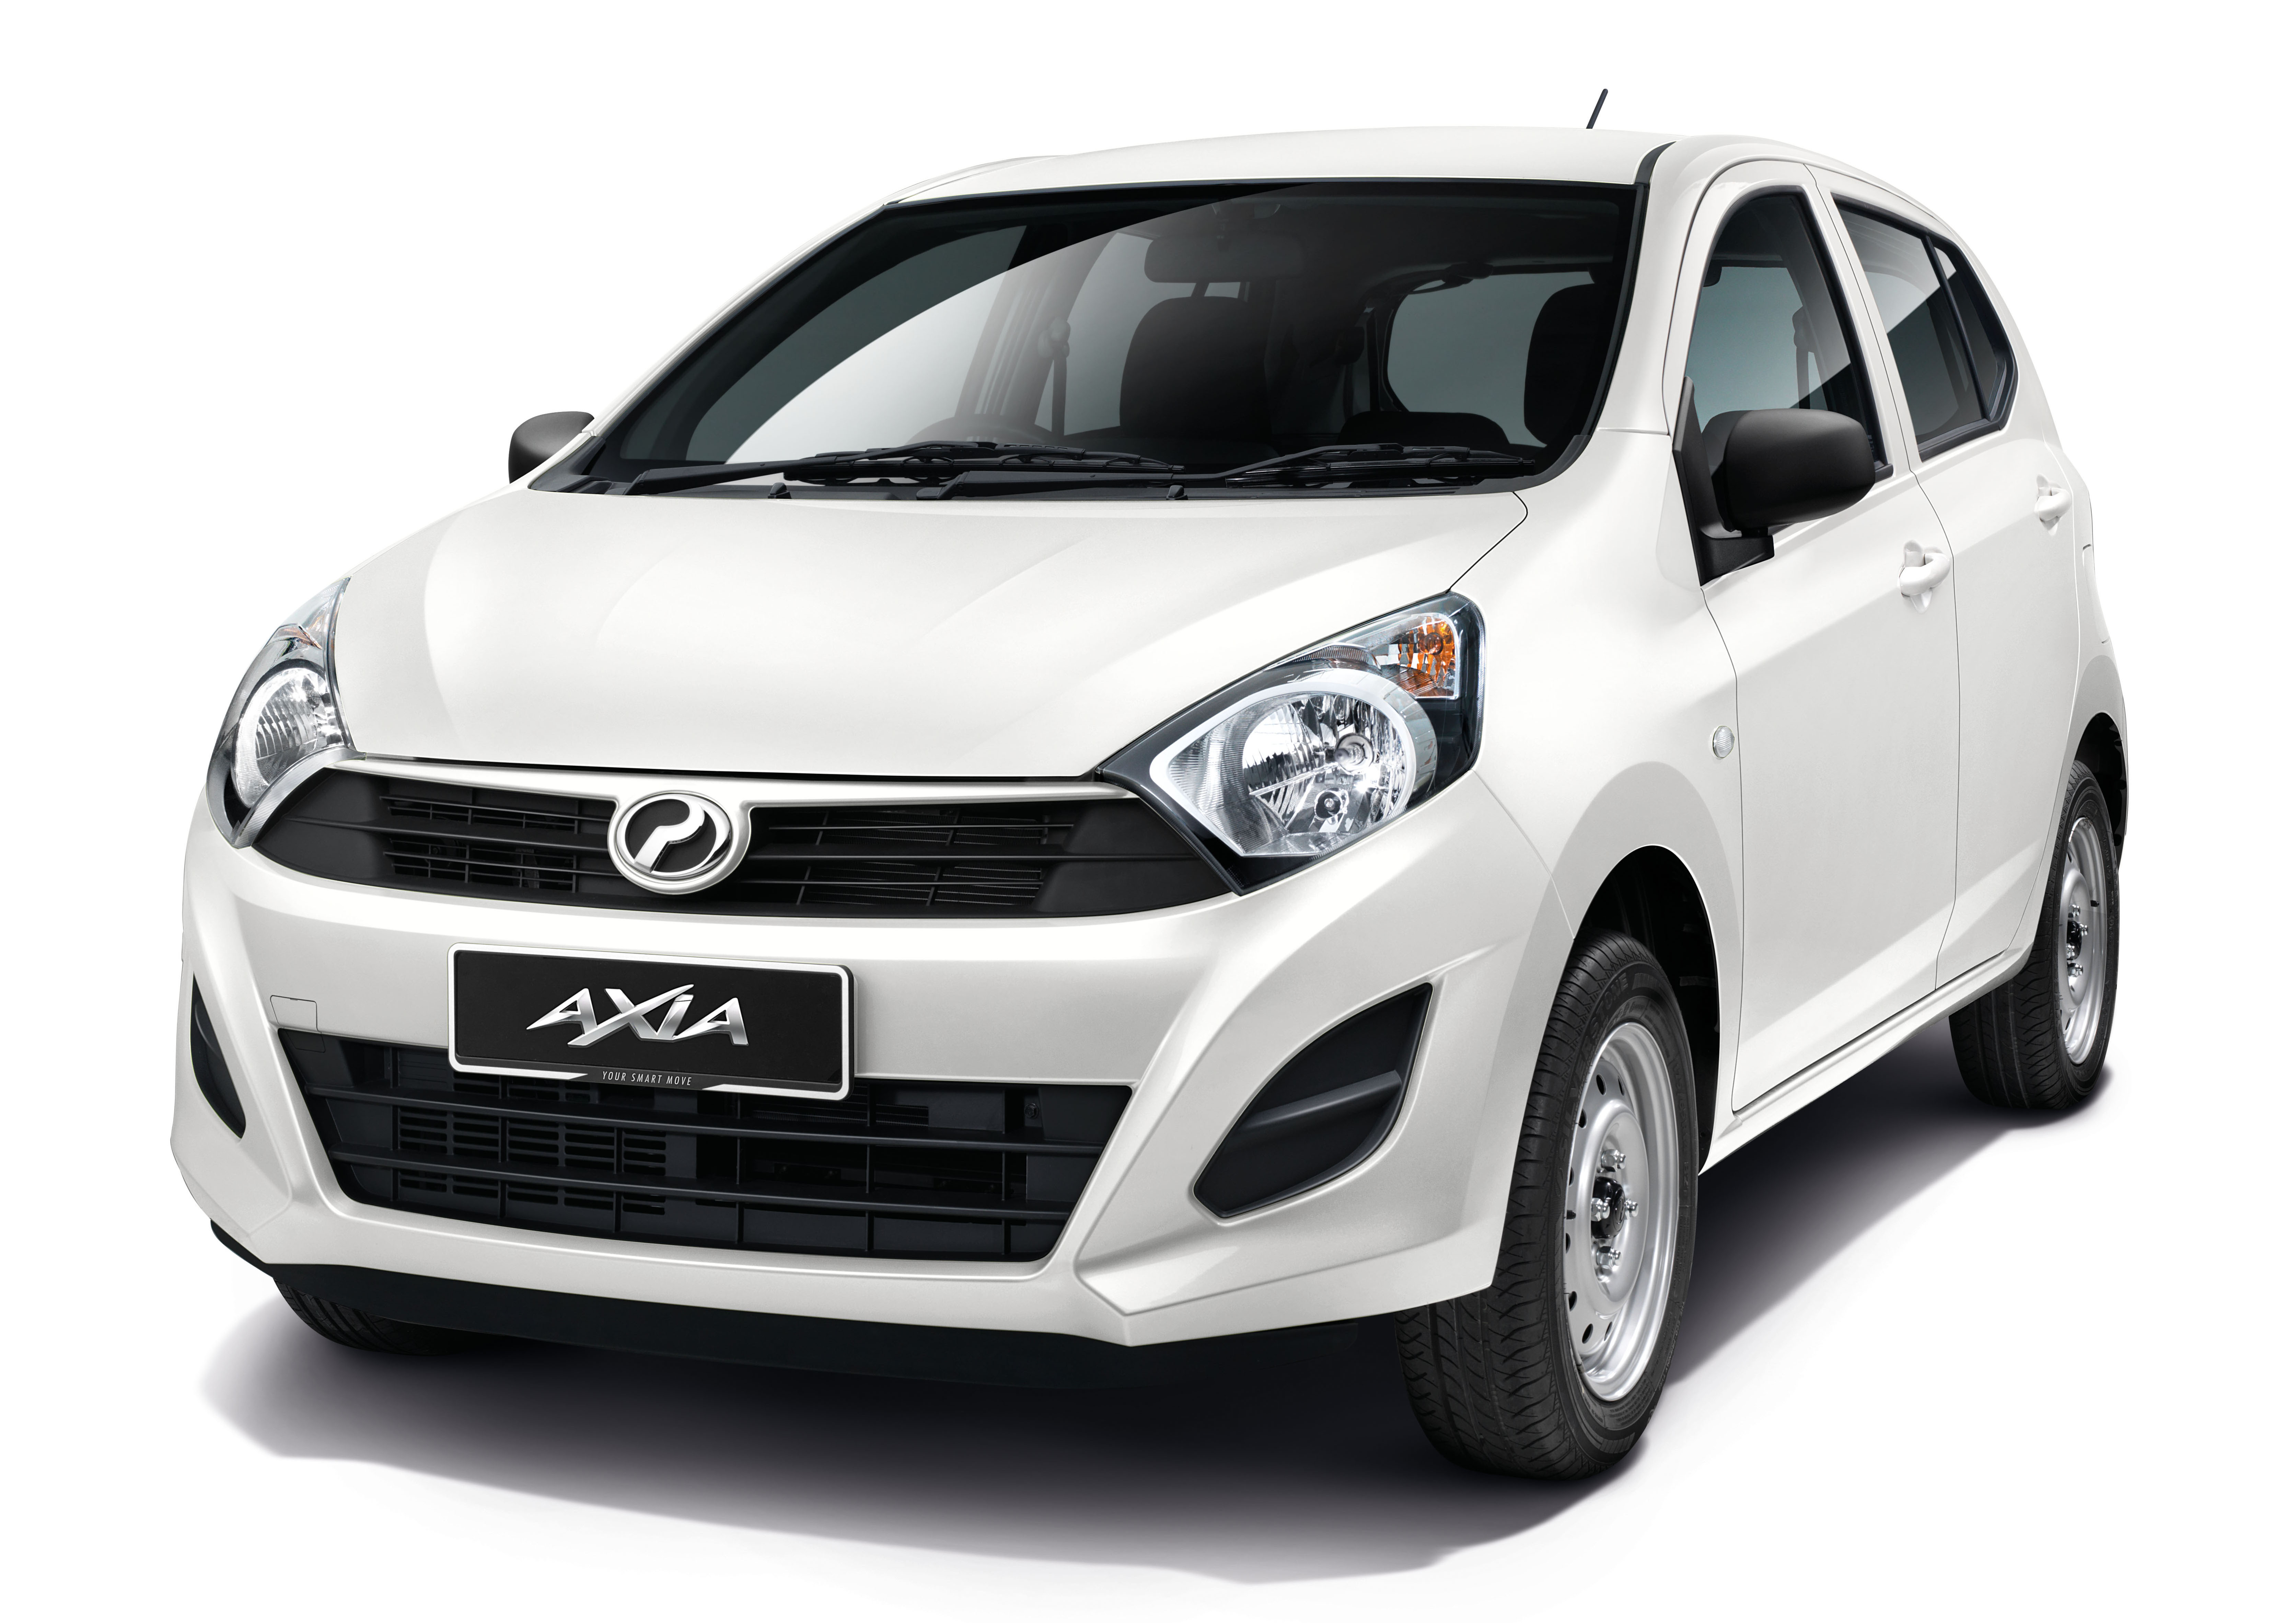 Enjoy . Life Perodua Axia launched – final prices lower than estimated